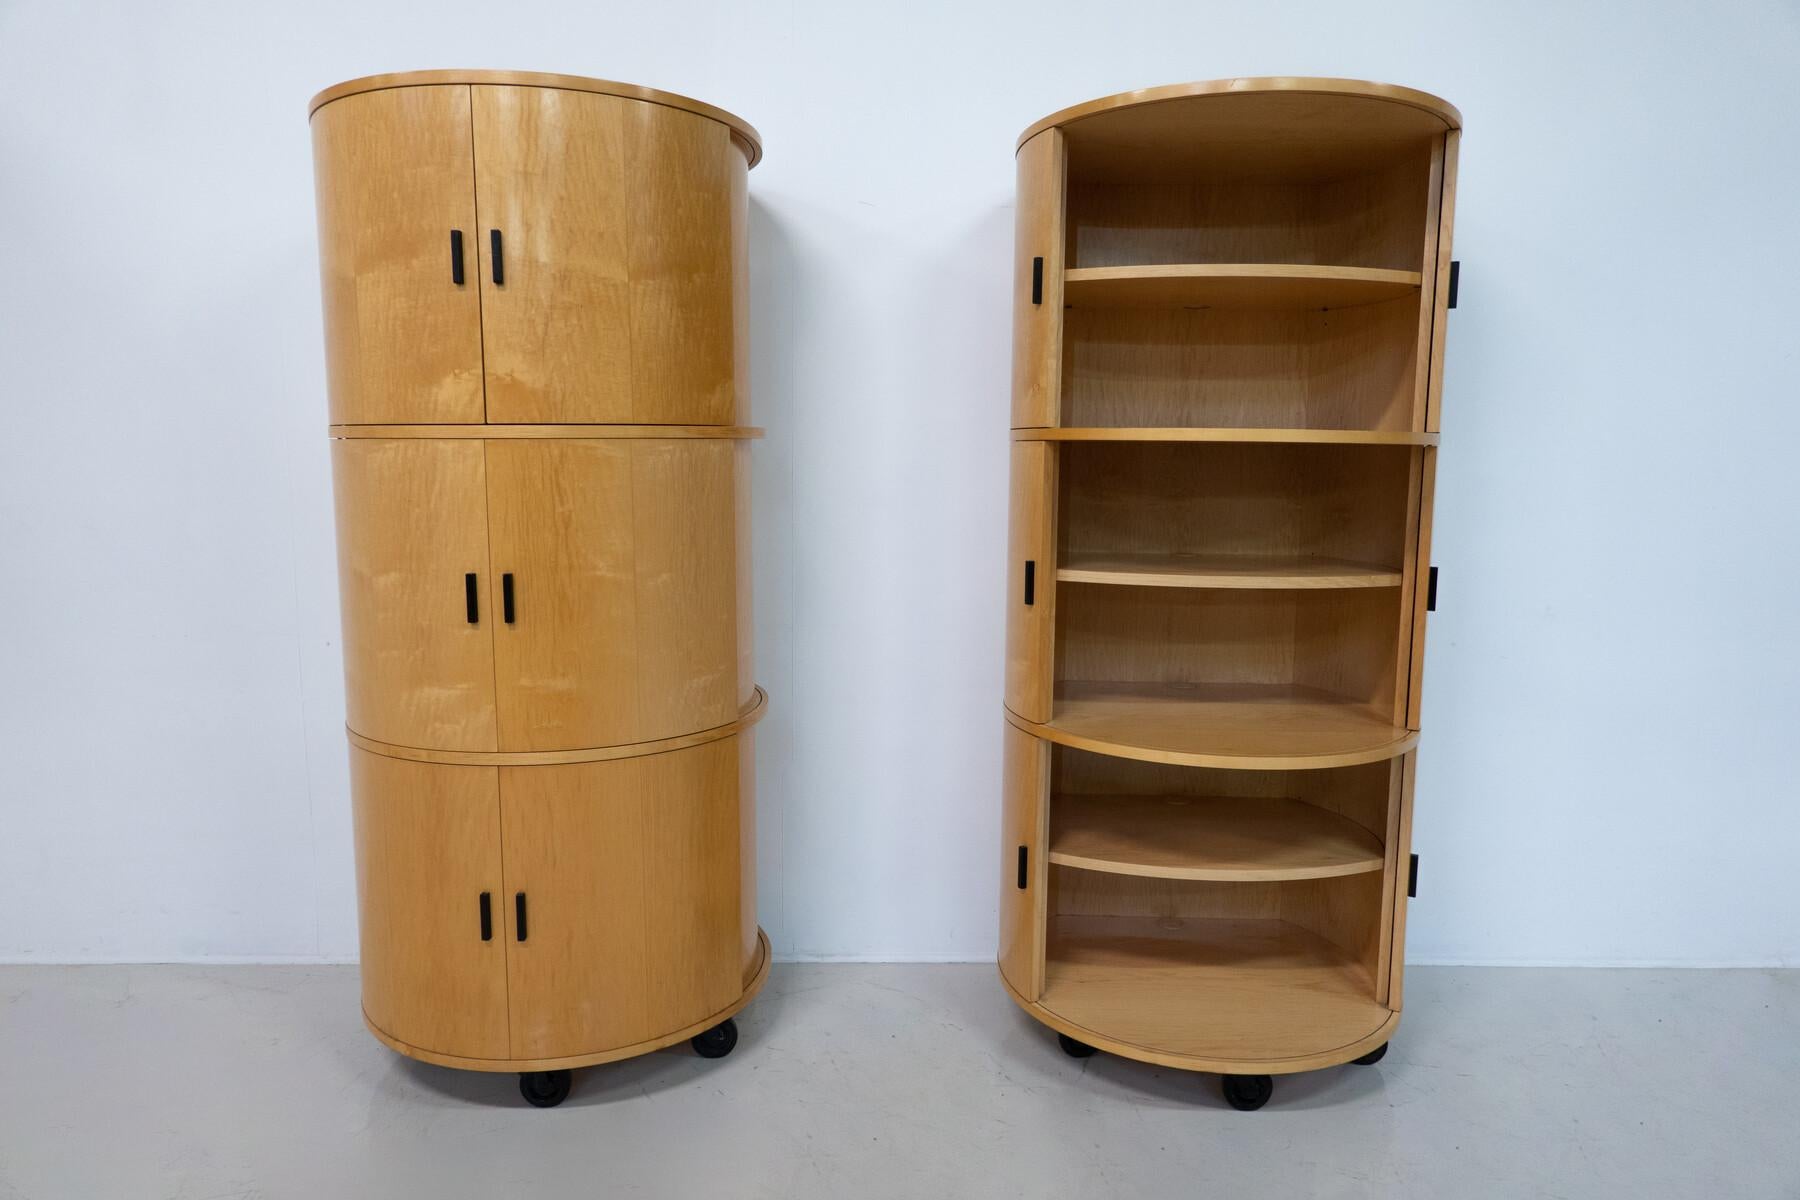 Late 20th Century Mid-Century Modern Round Cabinets 'Big O' by Dirk Meylaerts, 1990s For Sale